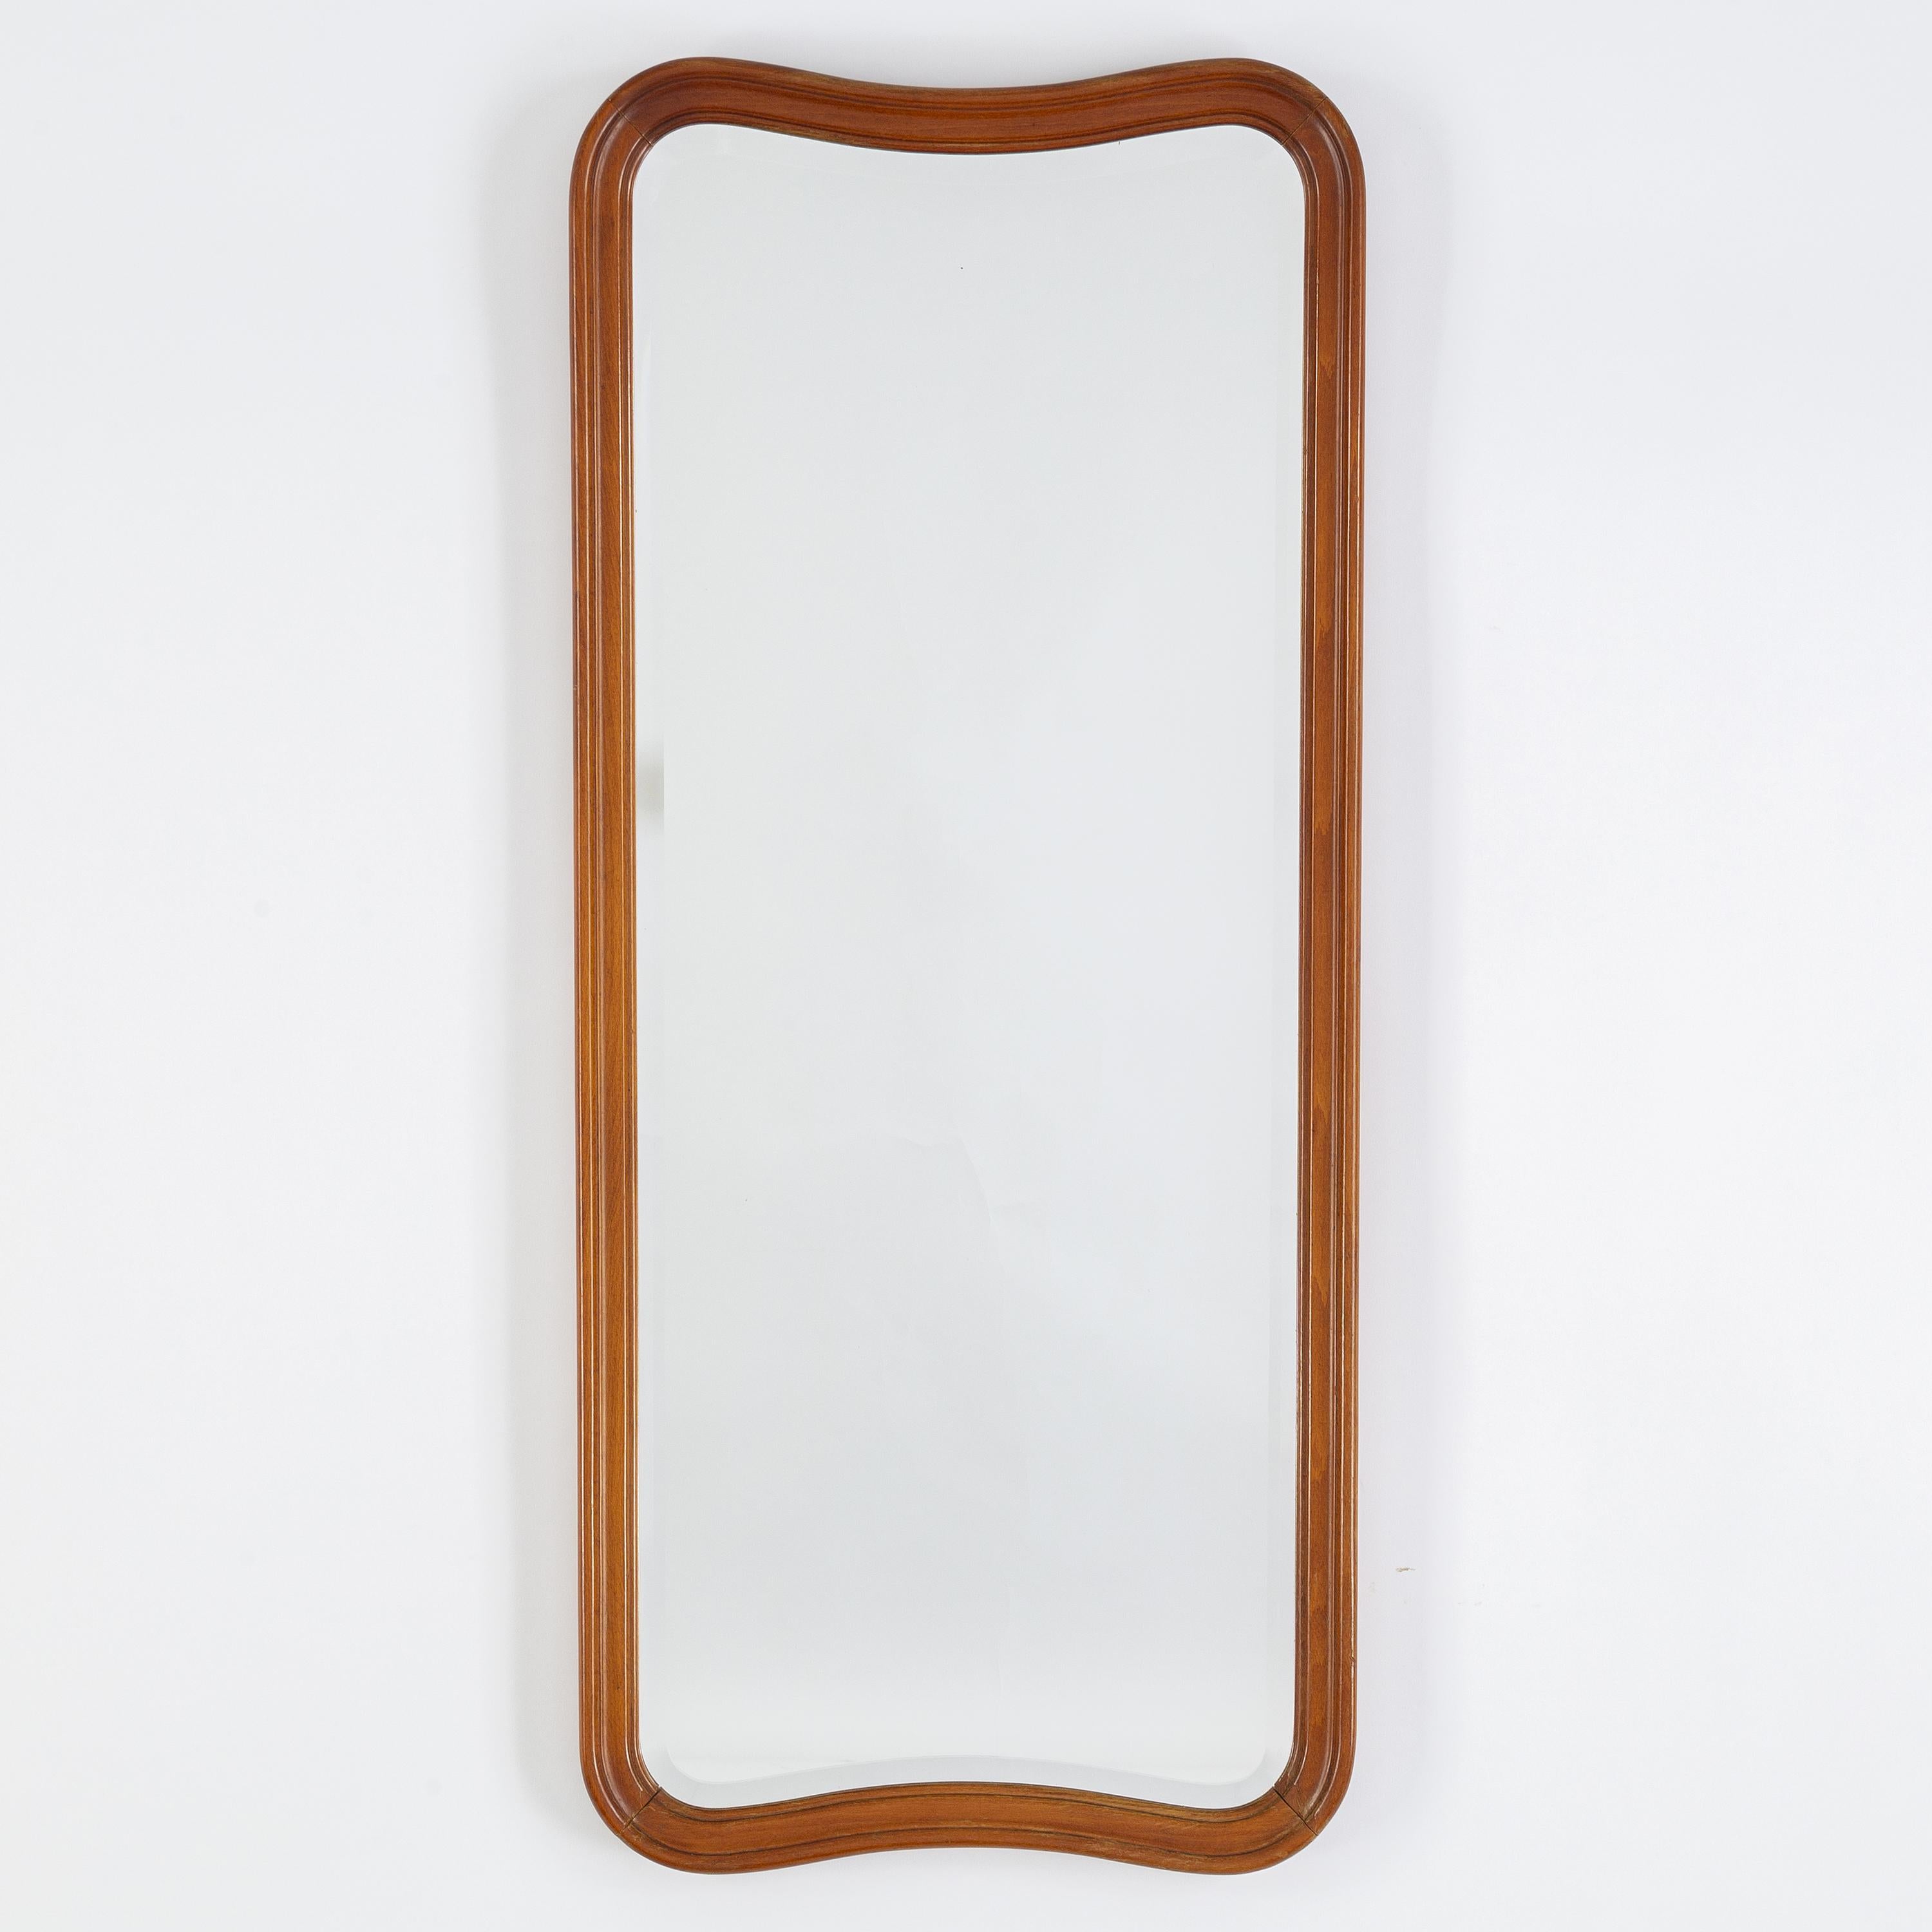 A finely sculpted organic wall mirror. Produced and designed in Sweden, 1940s. 

Other designers of the period include Paolo Buffa, Fontana Arte, G.A. Berg, Jean Royere, and Josef Frank.